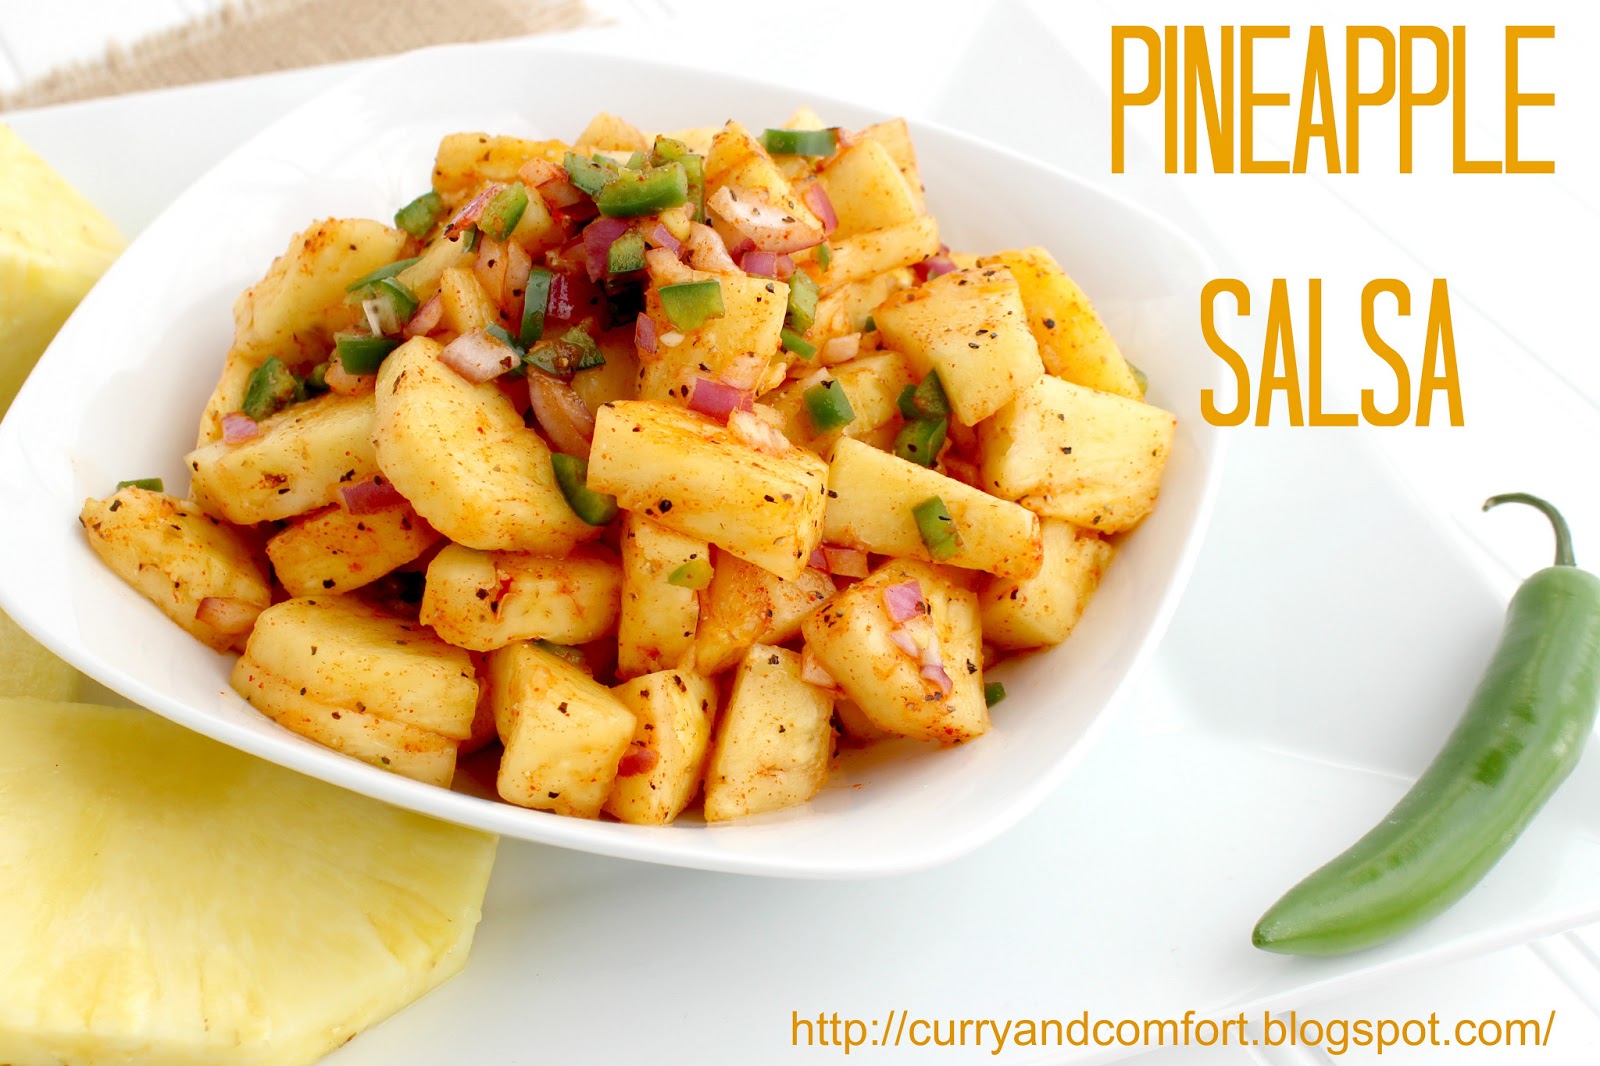 Kitchen Simmer: Spicy and Fresh Pineapple Salsa